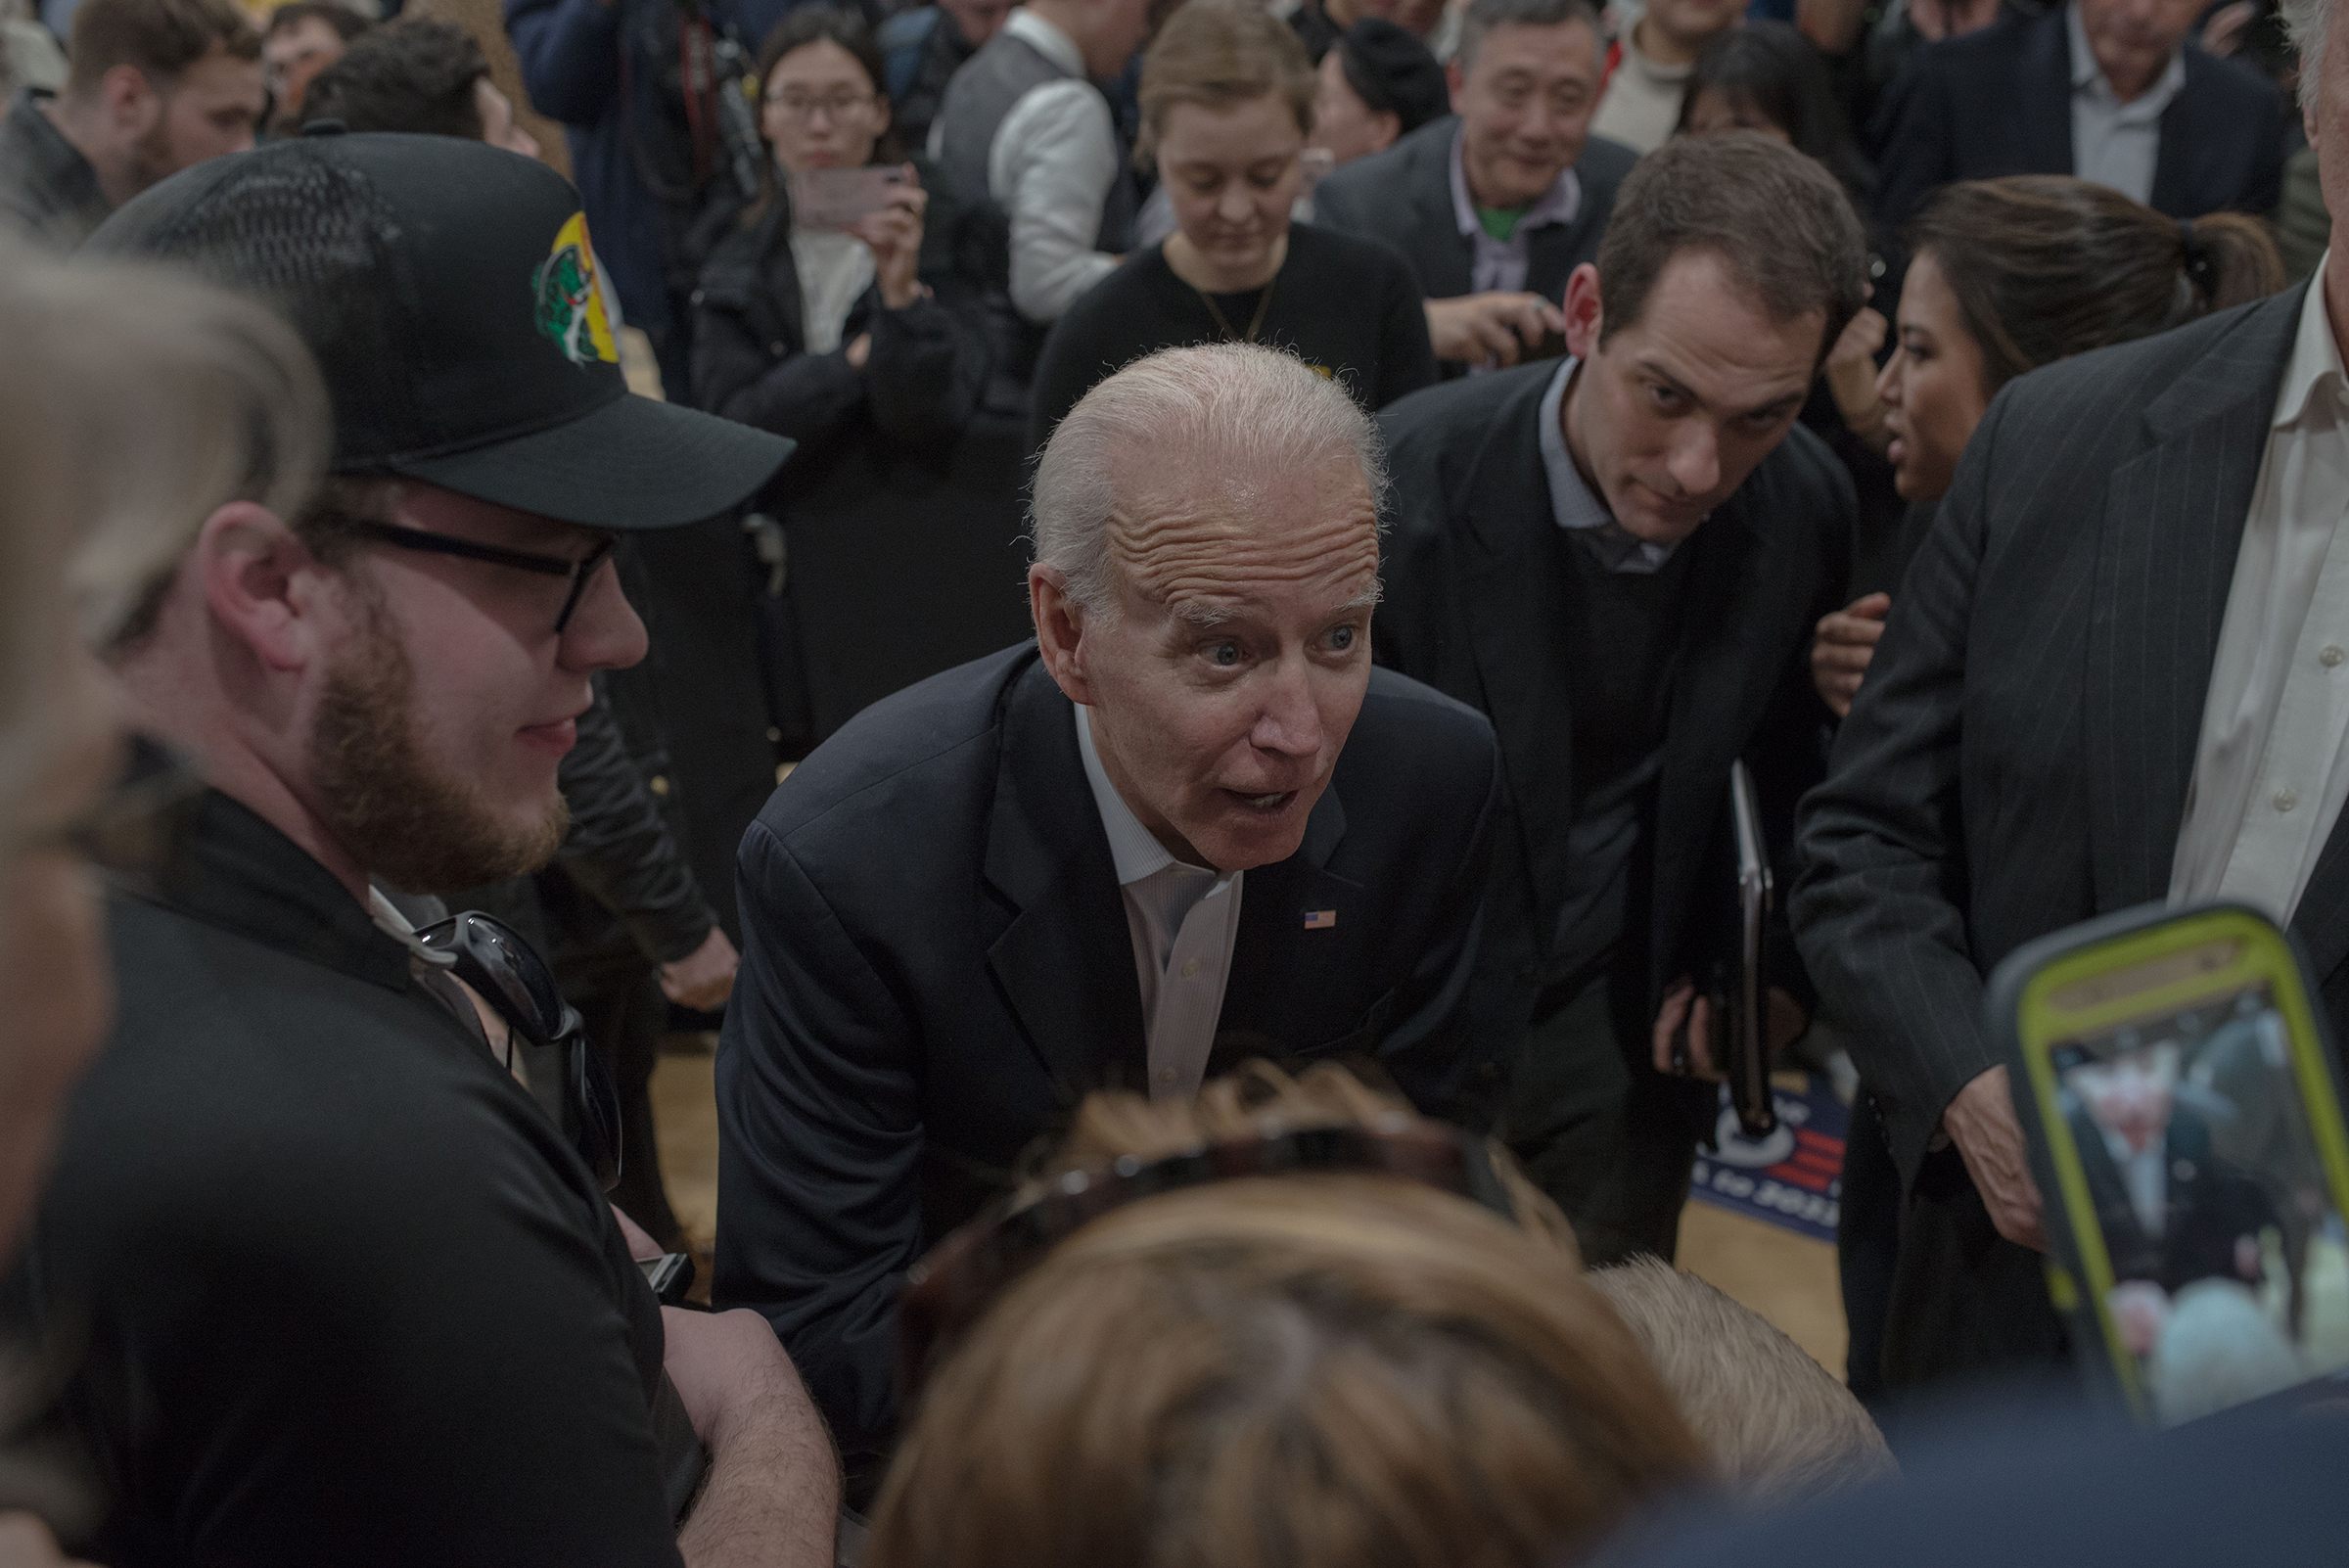 Biden at a town hall in Des Moines on Feb. 2